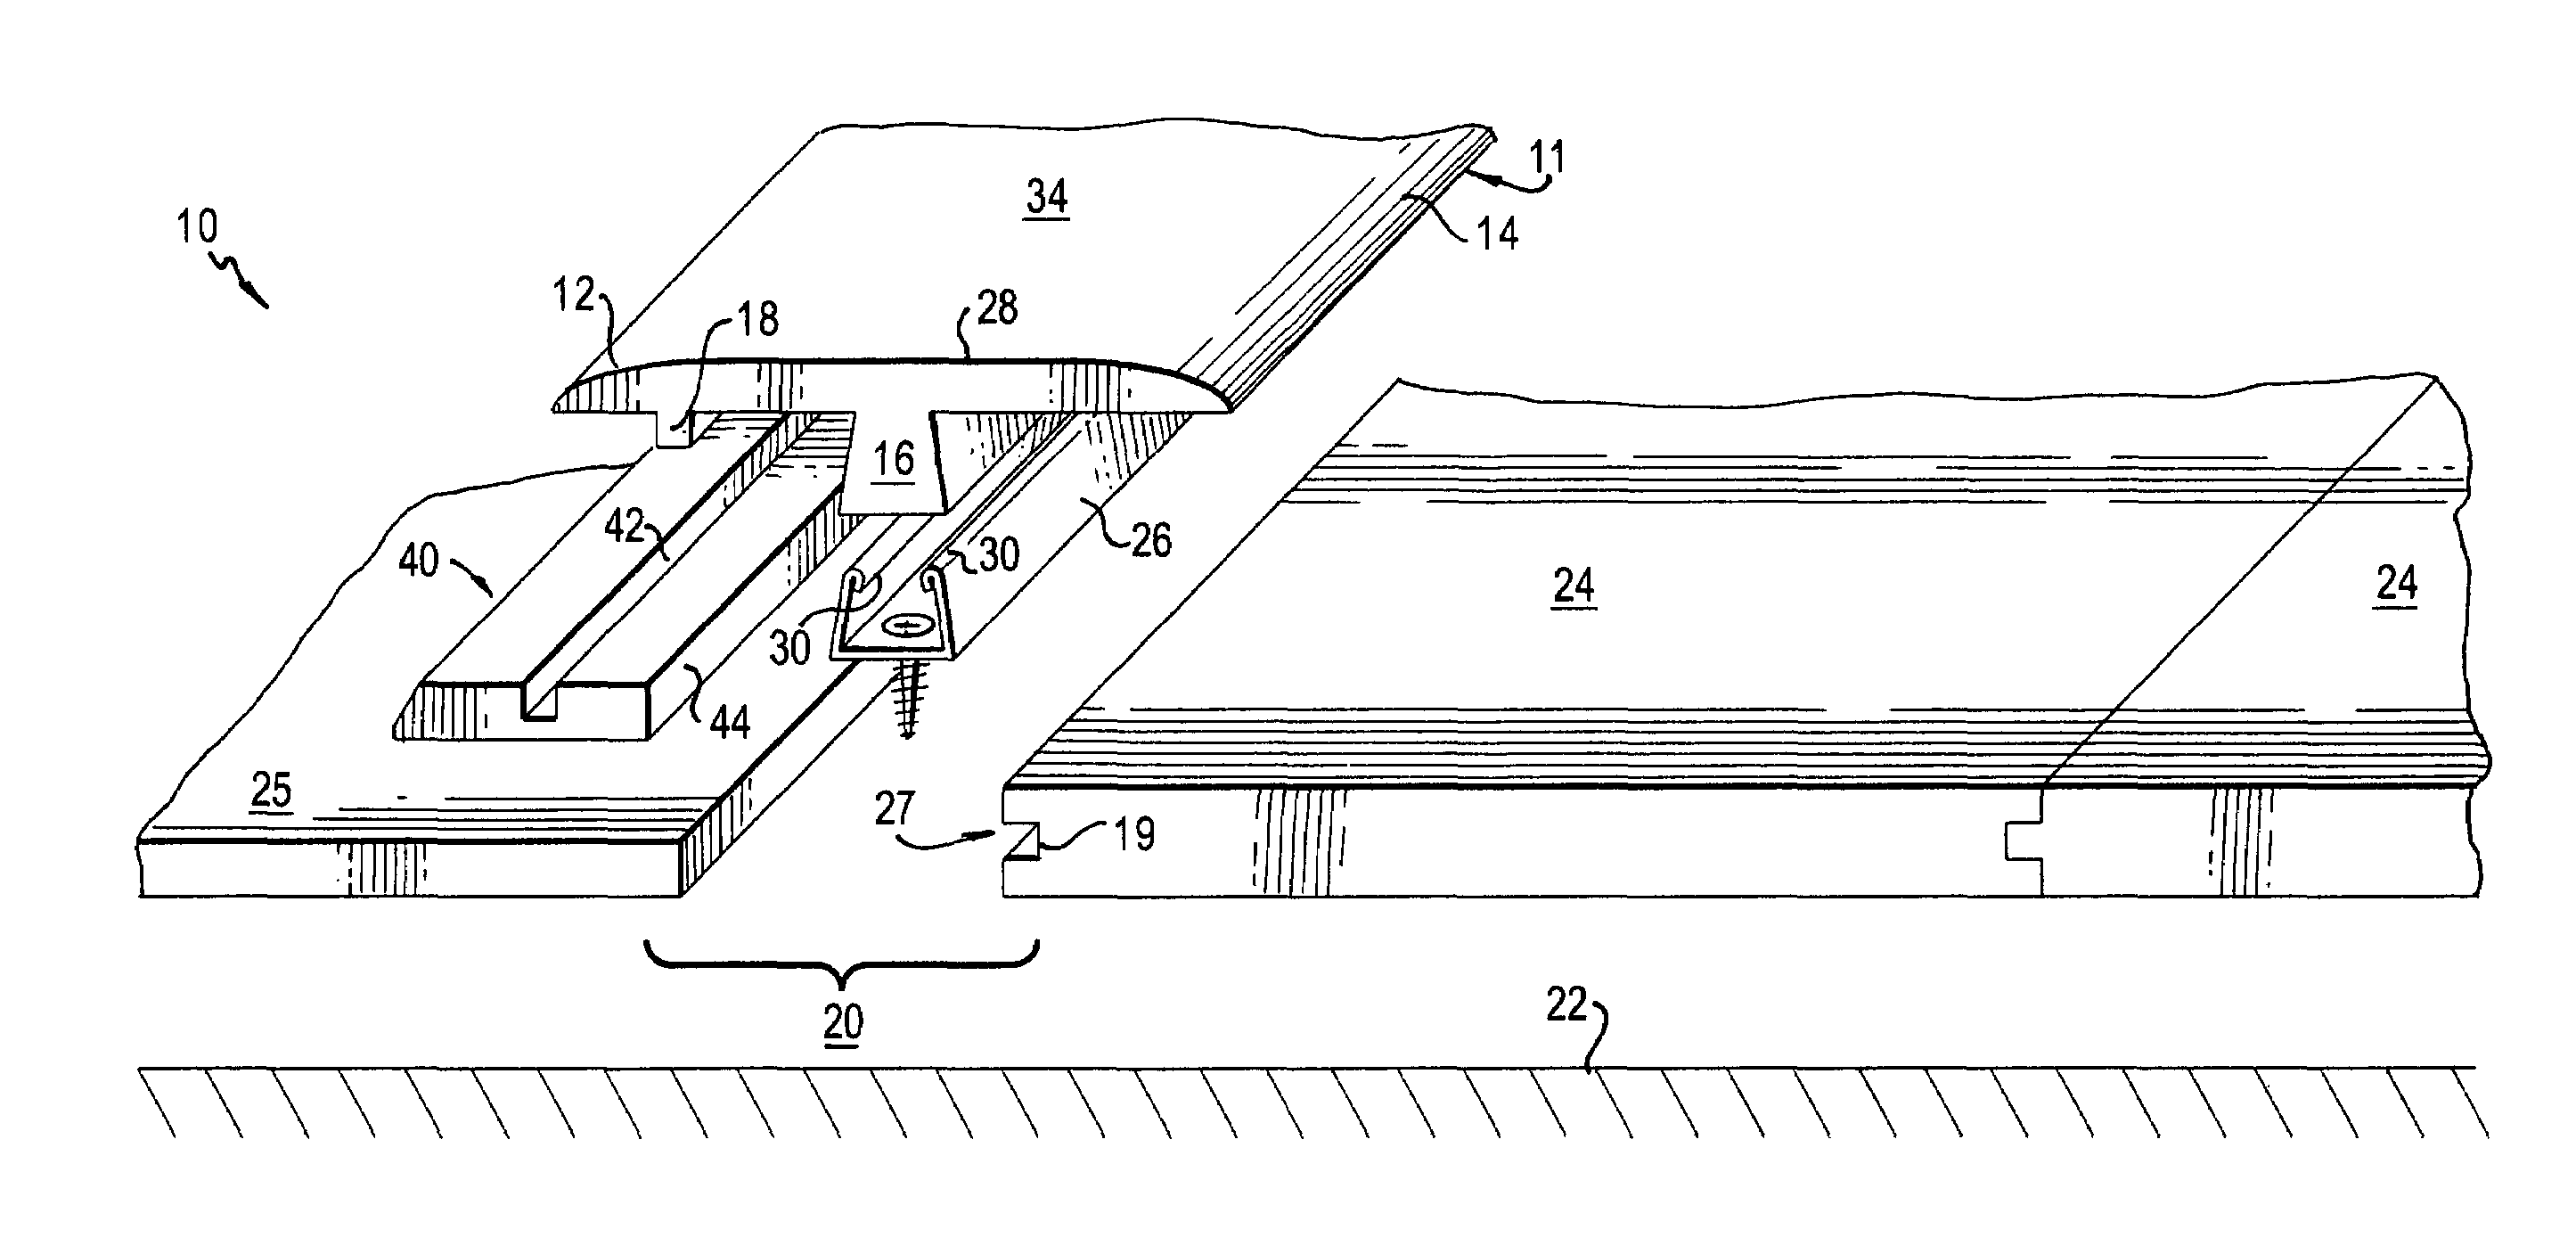 Transition molding and installation methods therefor